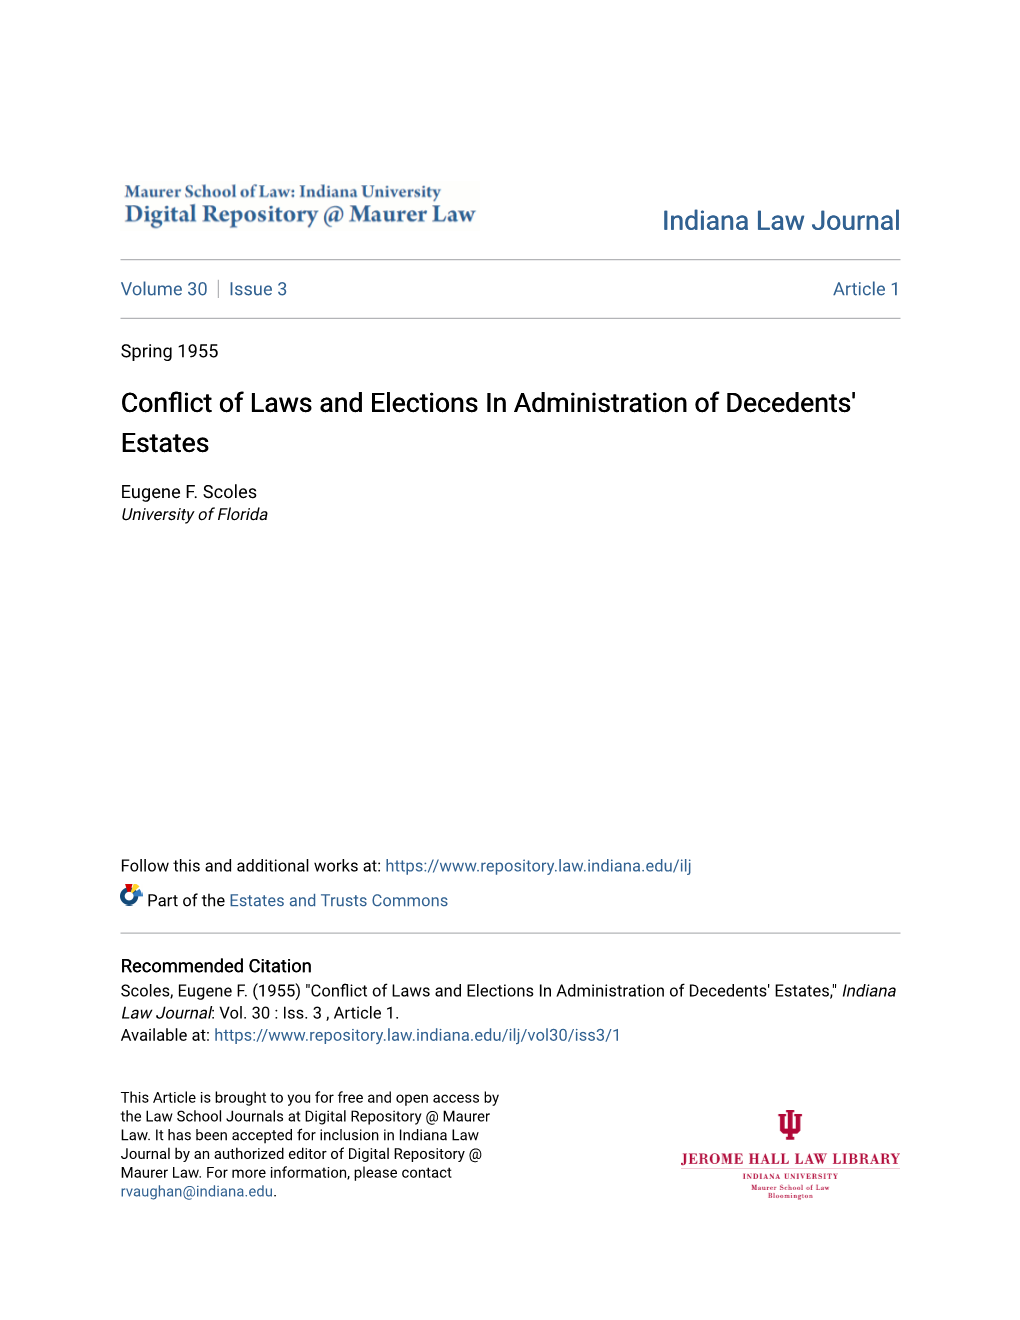 Conflict of Laws and Elections in Administration of Decedents' Estates